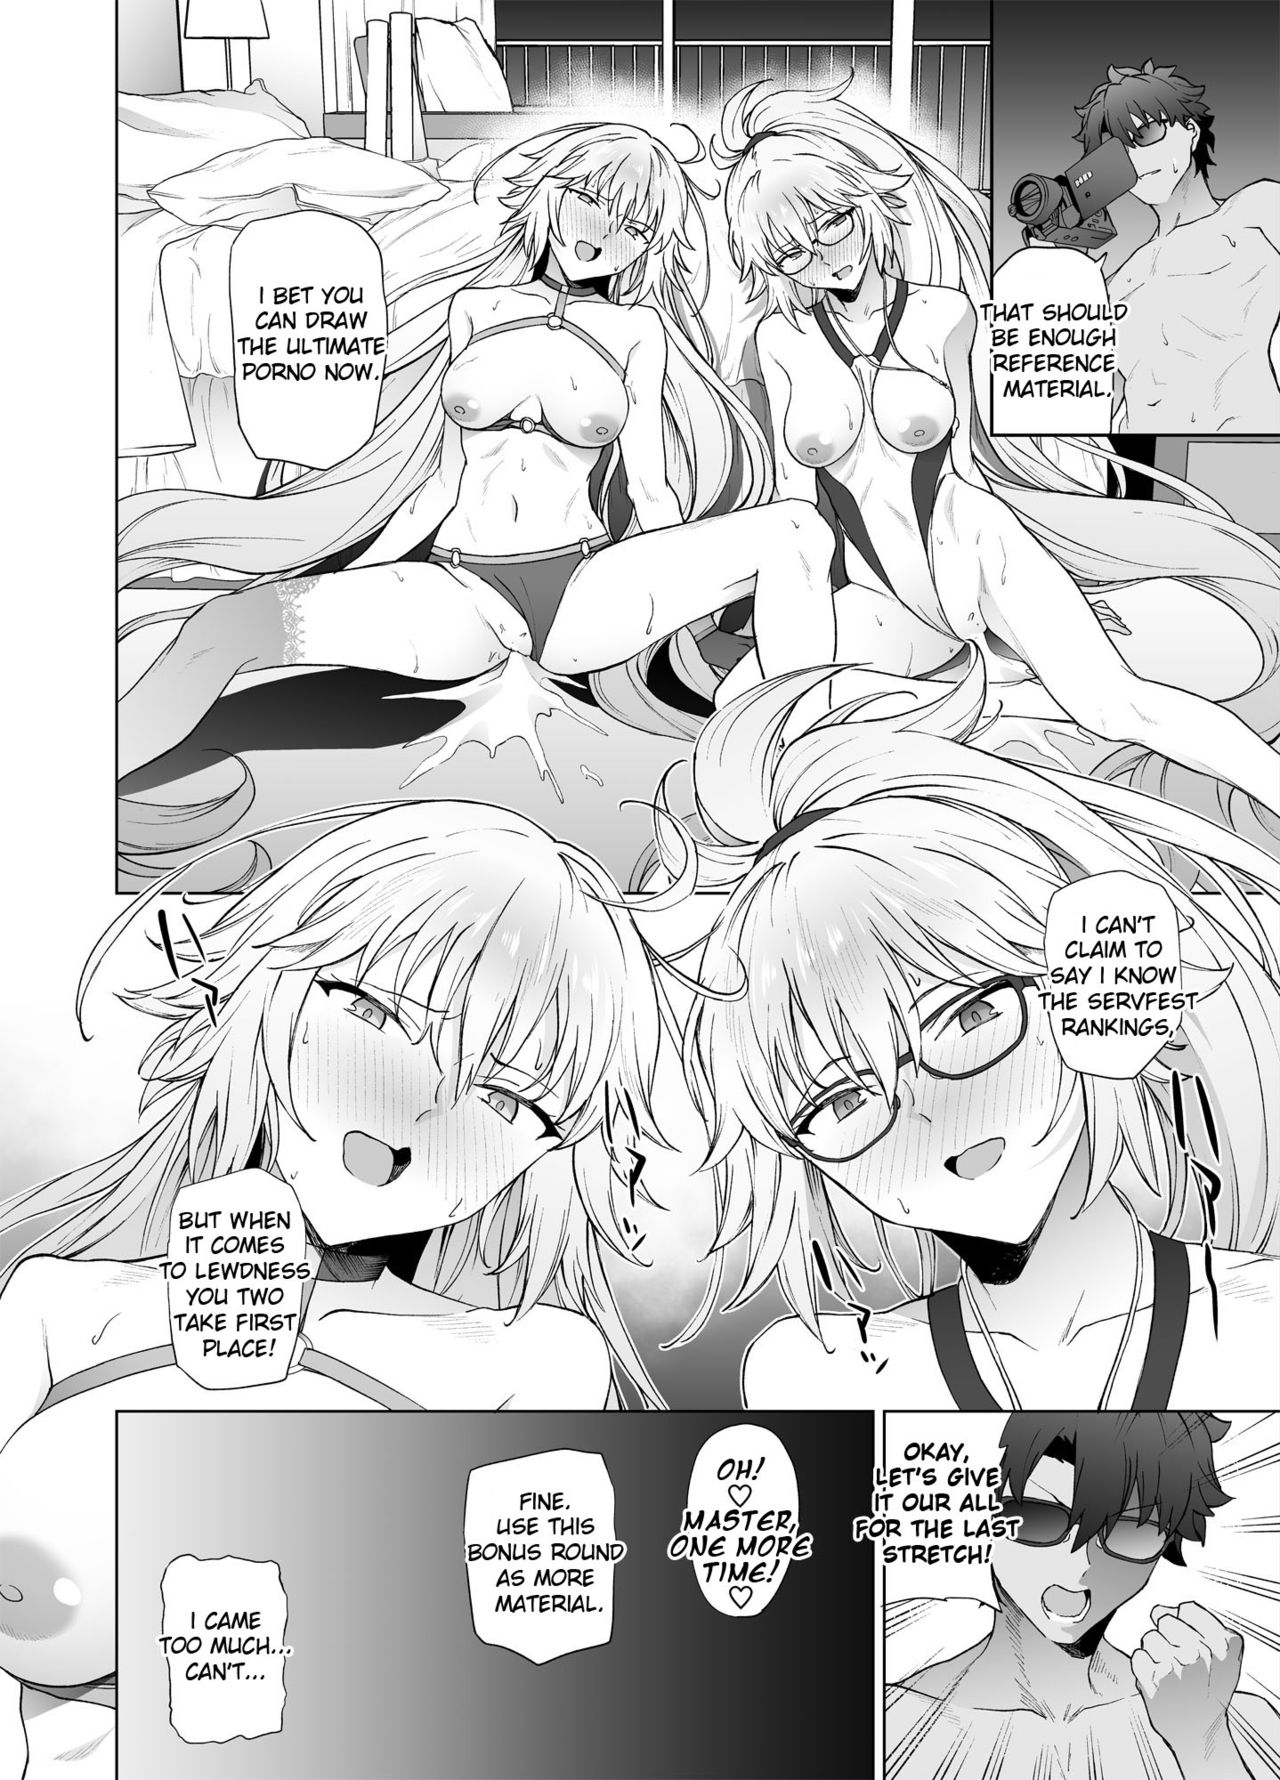 [EXTENDED PART (Endo Yoshiki)] Jeanne W (Fate/Grand Order) [Digital] (English) page 35 full